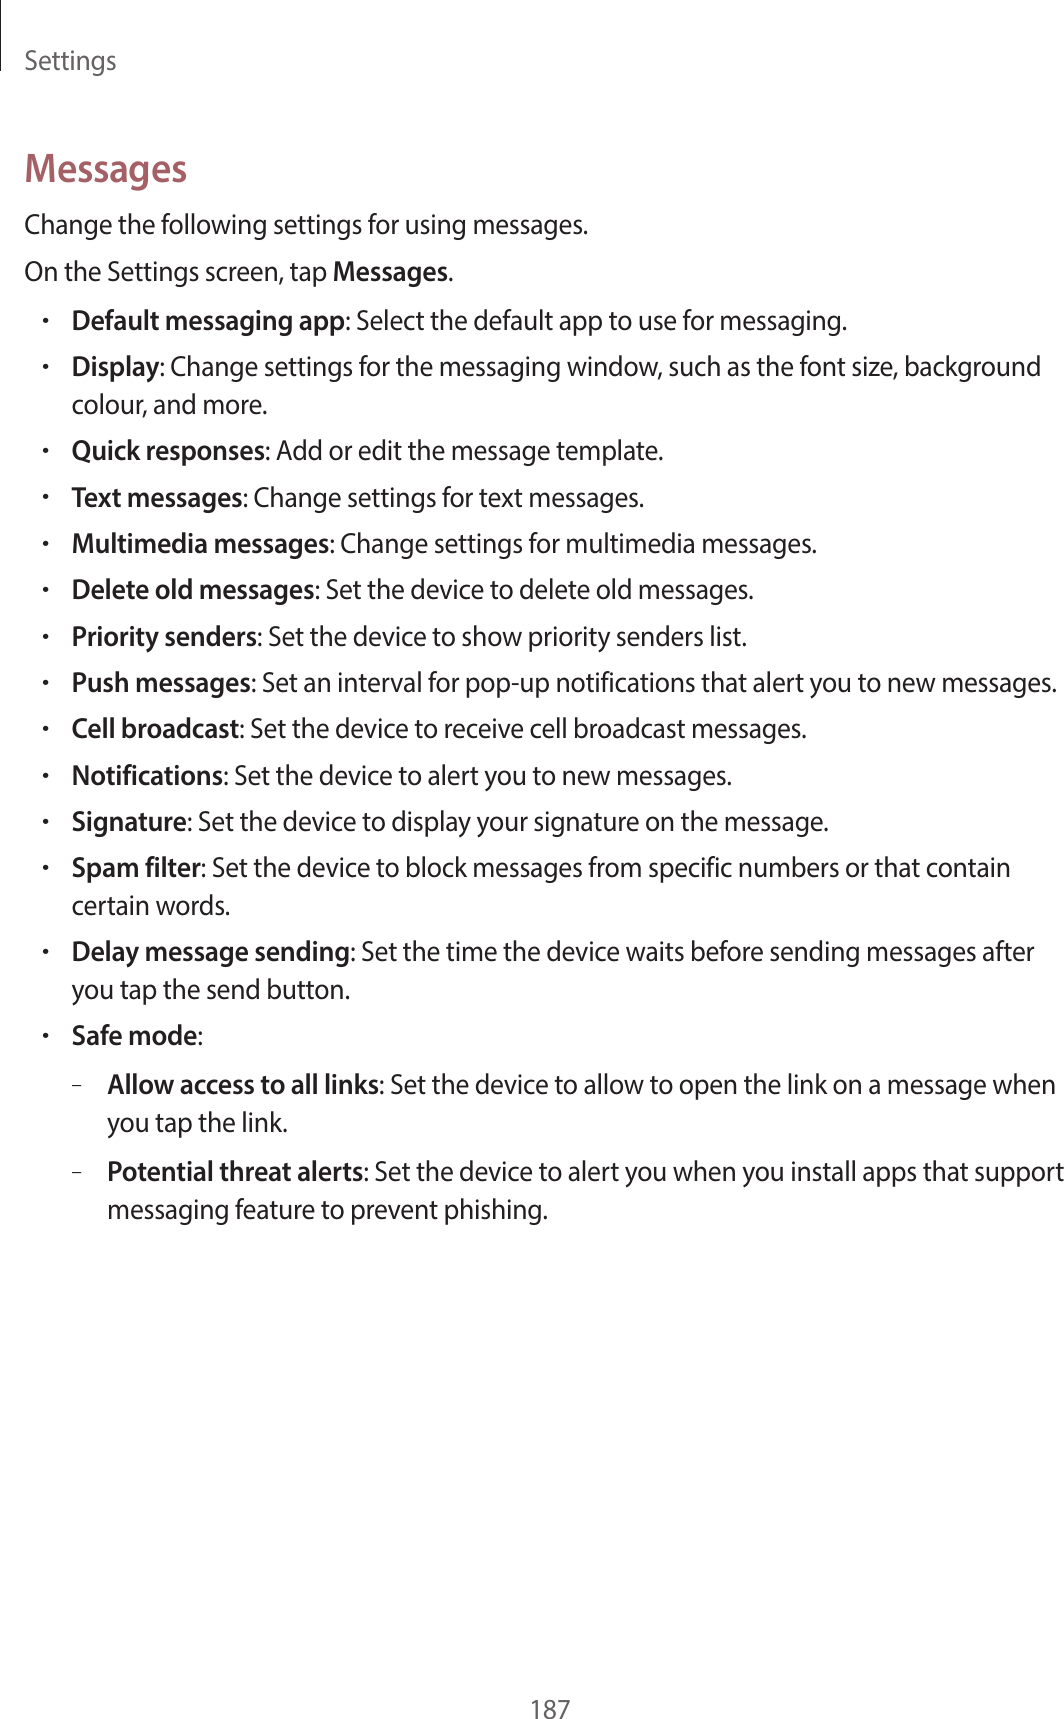 Settings187MessagesChange the following settings for using messages.On the Settings screen, tap Messages.•Default messaging app: Select the default app to use for messaging.•Display: Change settings for the messaging window, such as the font size, background colour, and more.•Quick responses: Add or edit the message template.•Text messages: Change settings for text messages.•Multimedia messages: Change settings for multimedia messages.•Delete old messages: Set the device to delete old messages.•Priority senders: Set the device to show priority senders list.•Push messages: Set an interval for pop-up notifications that alert you to new messages.•Cell broadcast: Set the device to receive cell broadcast messages.•Notifications: Set the device to alert you to new messages.•Signature: Set the device to display your signature on the message.•Spam filter: Set the device to block messages from specific numbers or that contain certain words.•Delay message sending: Set the time the device waits before sending messages after you tap the send button.•Safe mode:–Allow access to all links: Set the device to allow to open the link on a message when you tap the link.–Potential threat alerts: Set the device to alert you when you install apps that support messaging feature to prevent phishing.